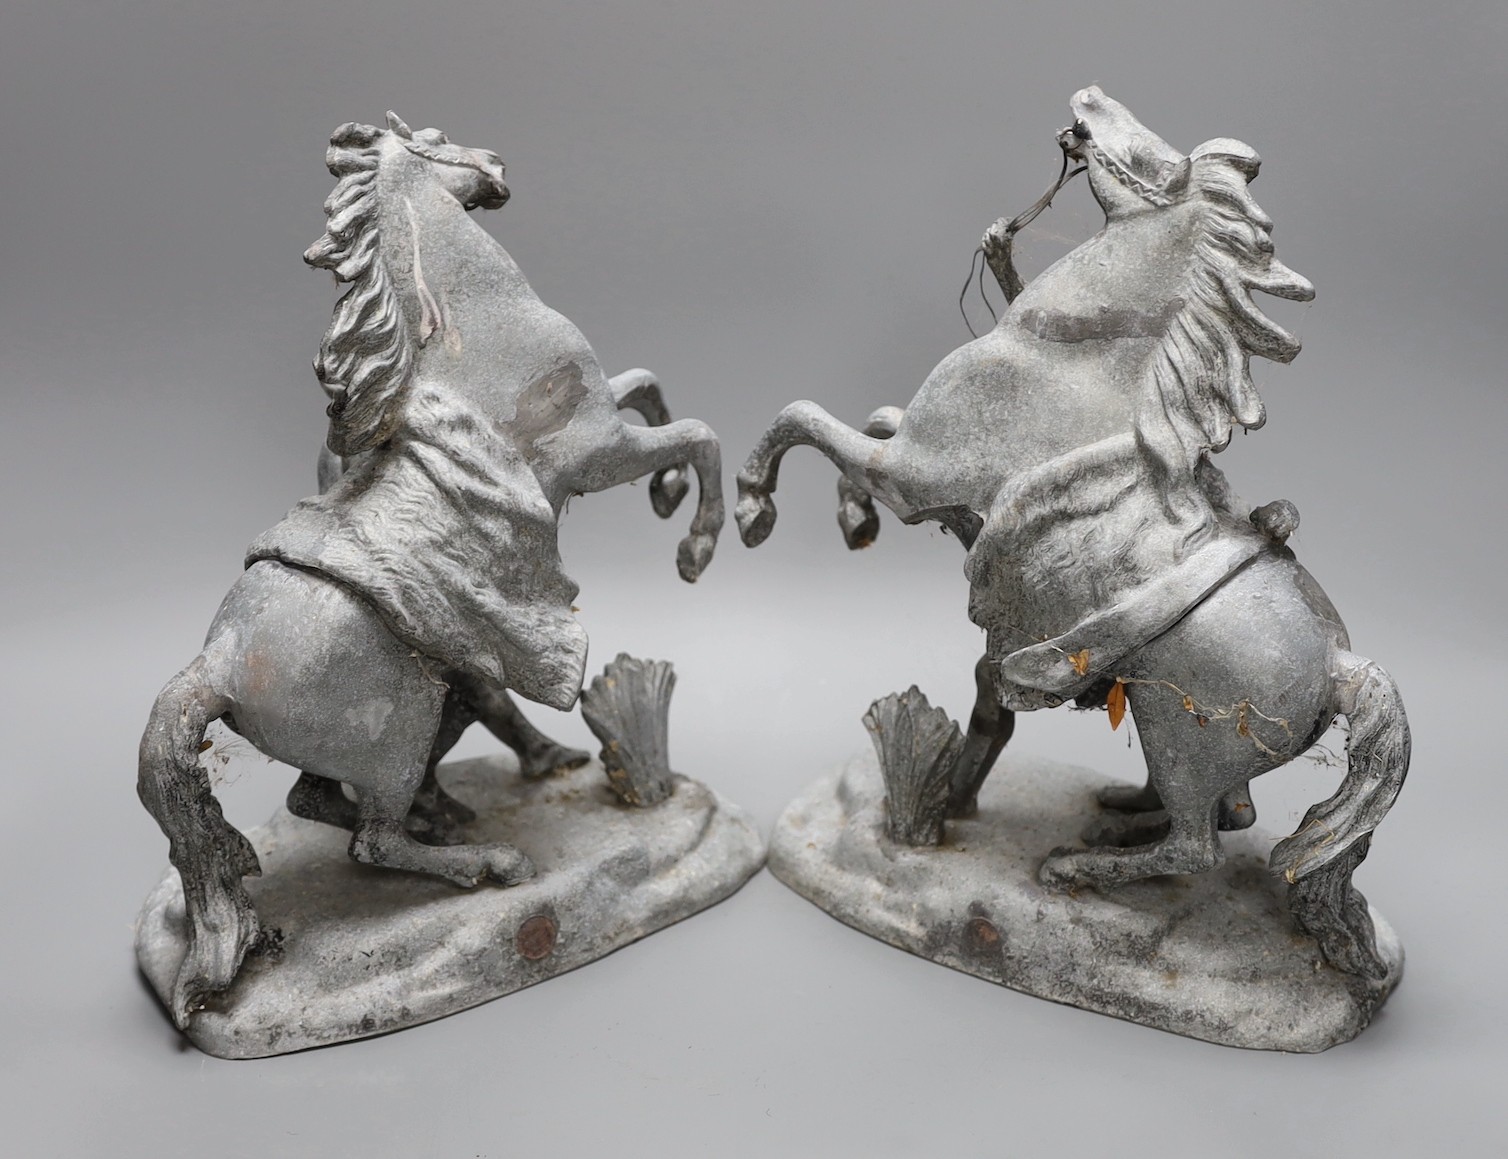 A pair of 19th century spelter Marli horse groups, 29cm